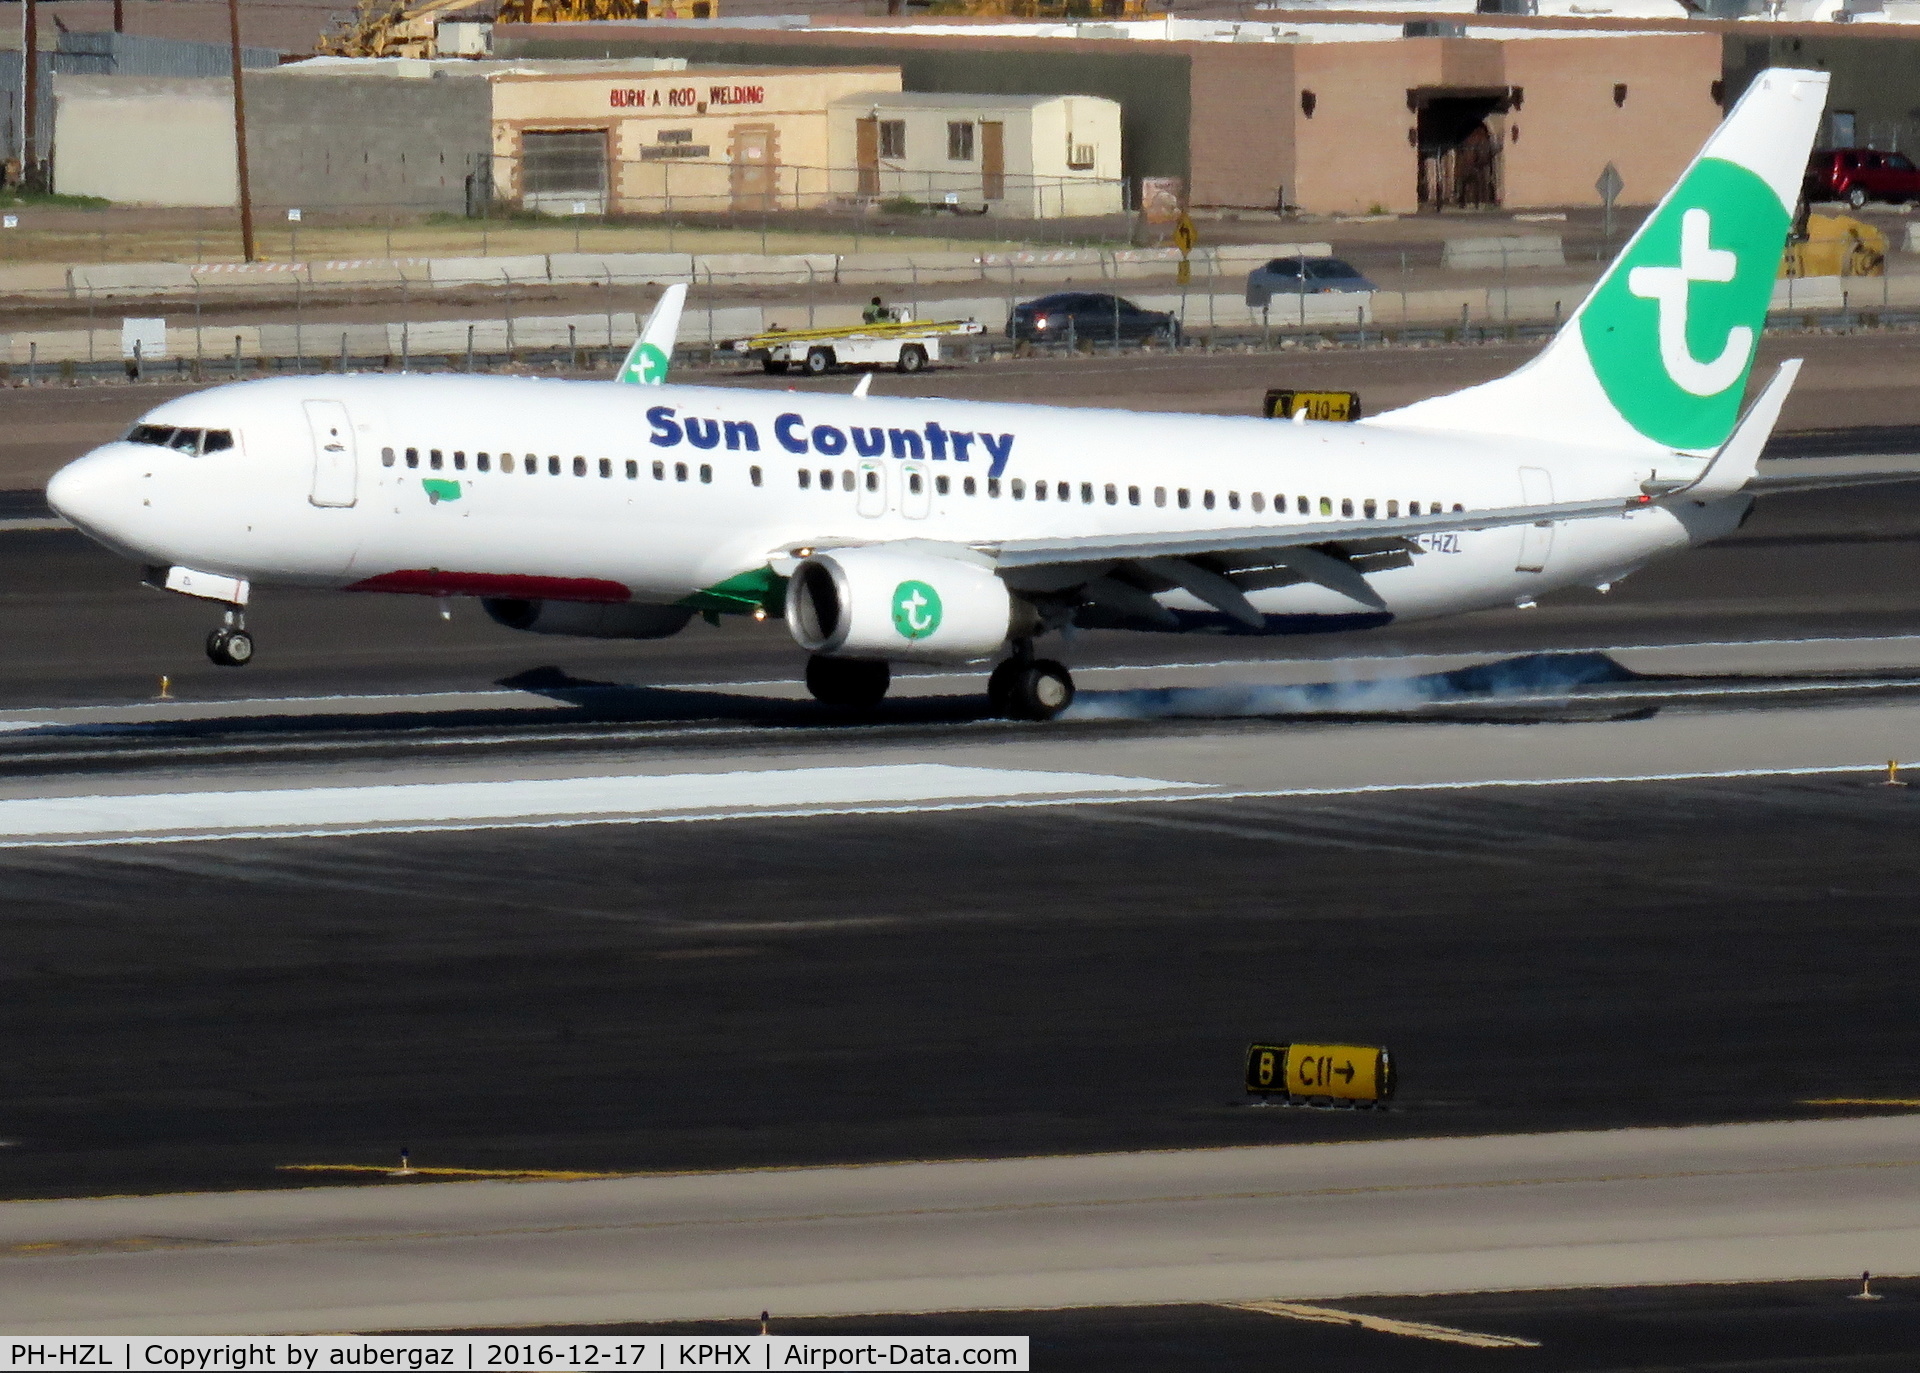 PH-HZL, 2001 Boeing 737-8K2 C/N 30391, Sun Country landing PHX Runway 26. Many previous paint schemes for 'HZL'